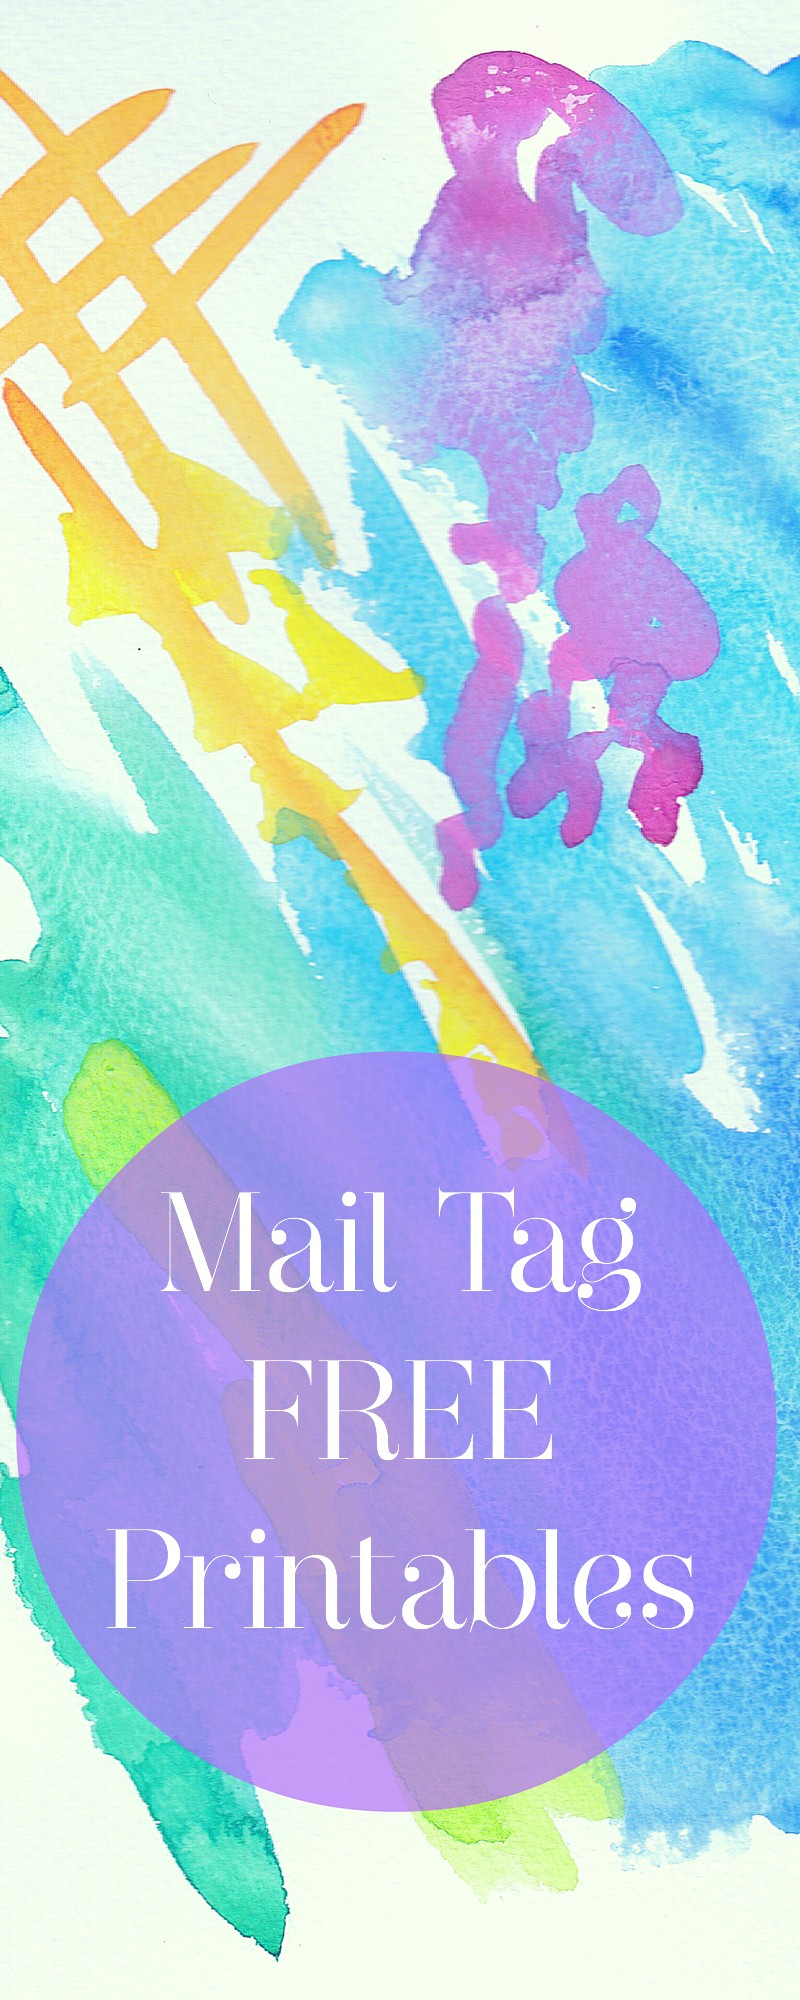 Mail Tag free printables PIN with text